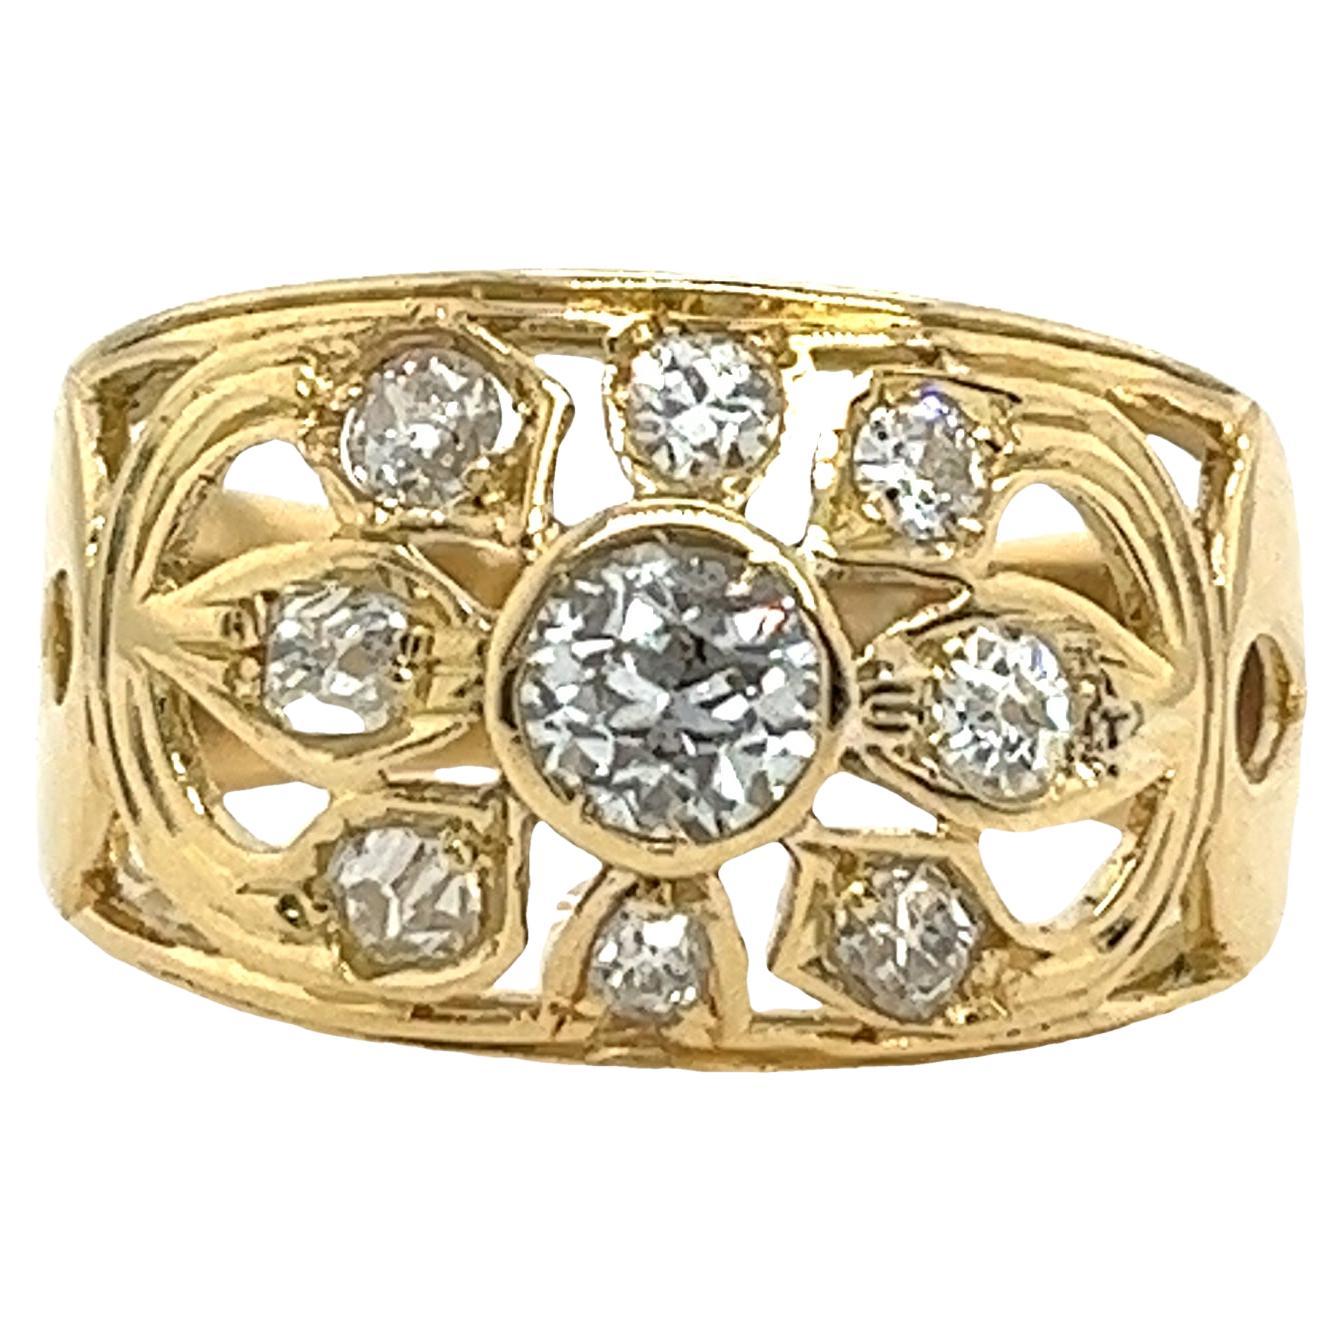 14ct YellGold Diamond Dress Ring Set With 0.60ct of Natural Diamonds For Sale